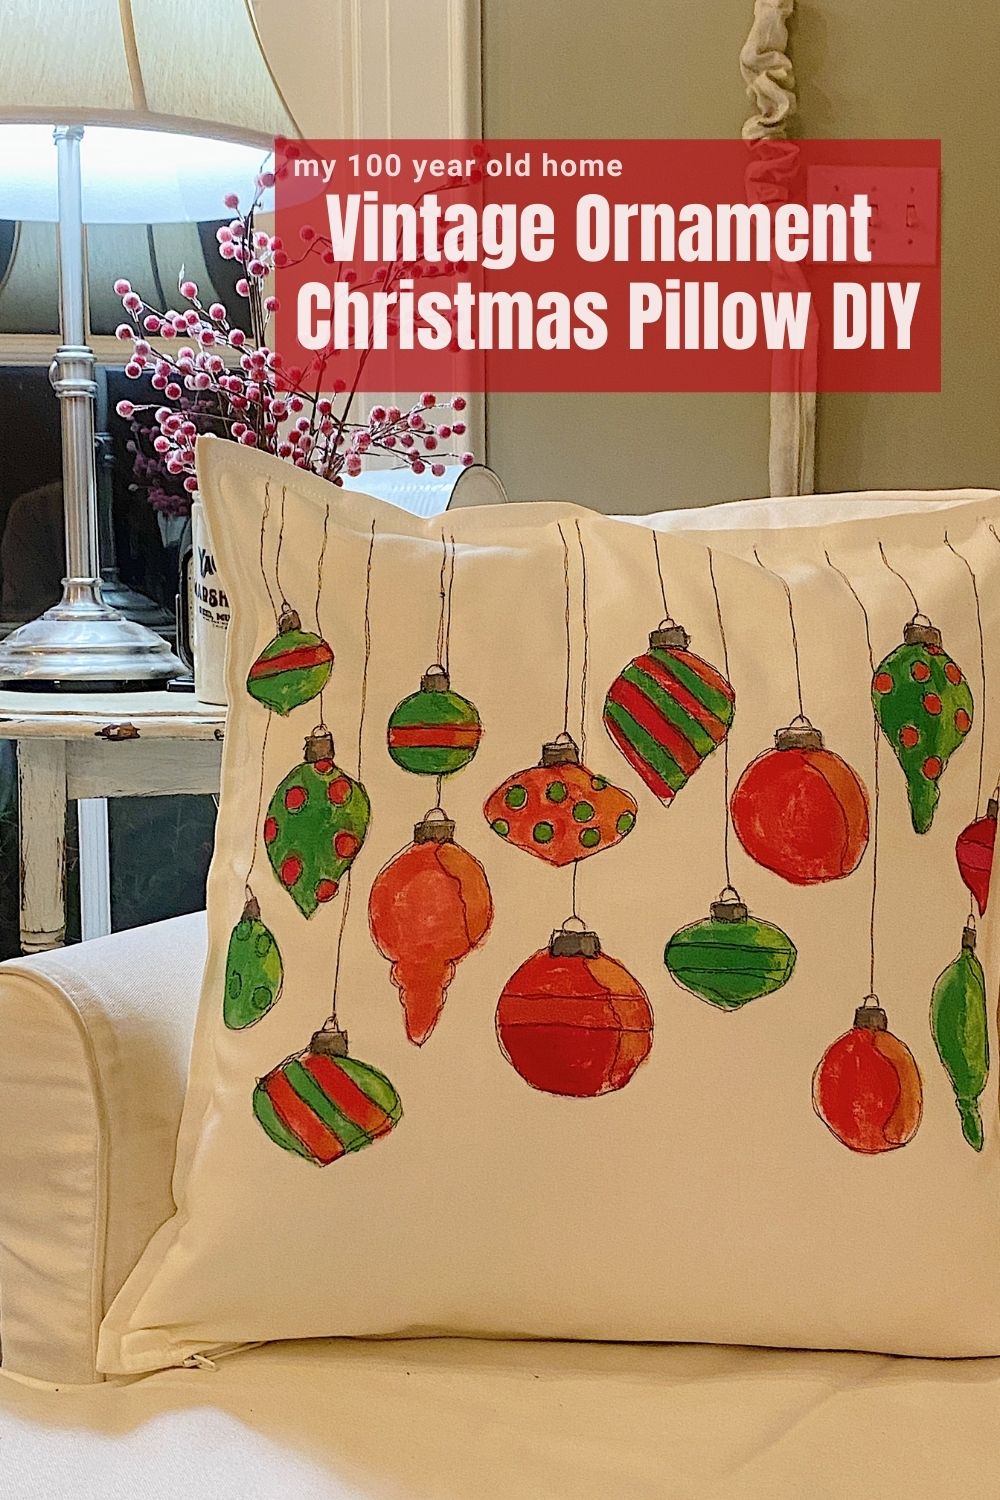 https://my100yearoldhome.com/wp-content/uploads/2021/12/Vintage-Ornament-Christmas-Pillow-1.jpg